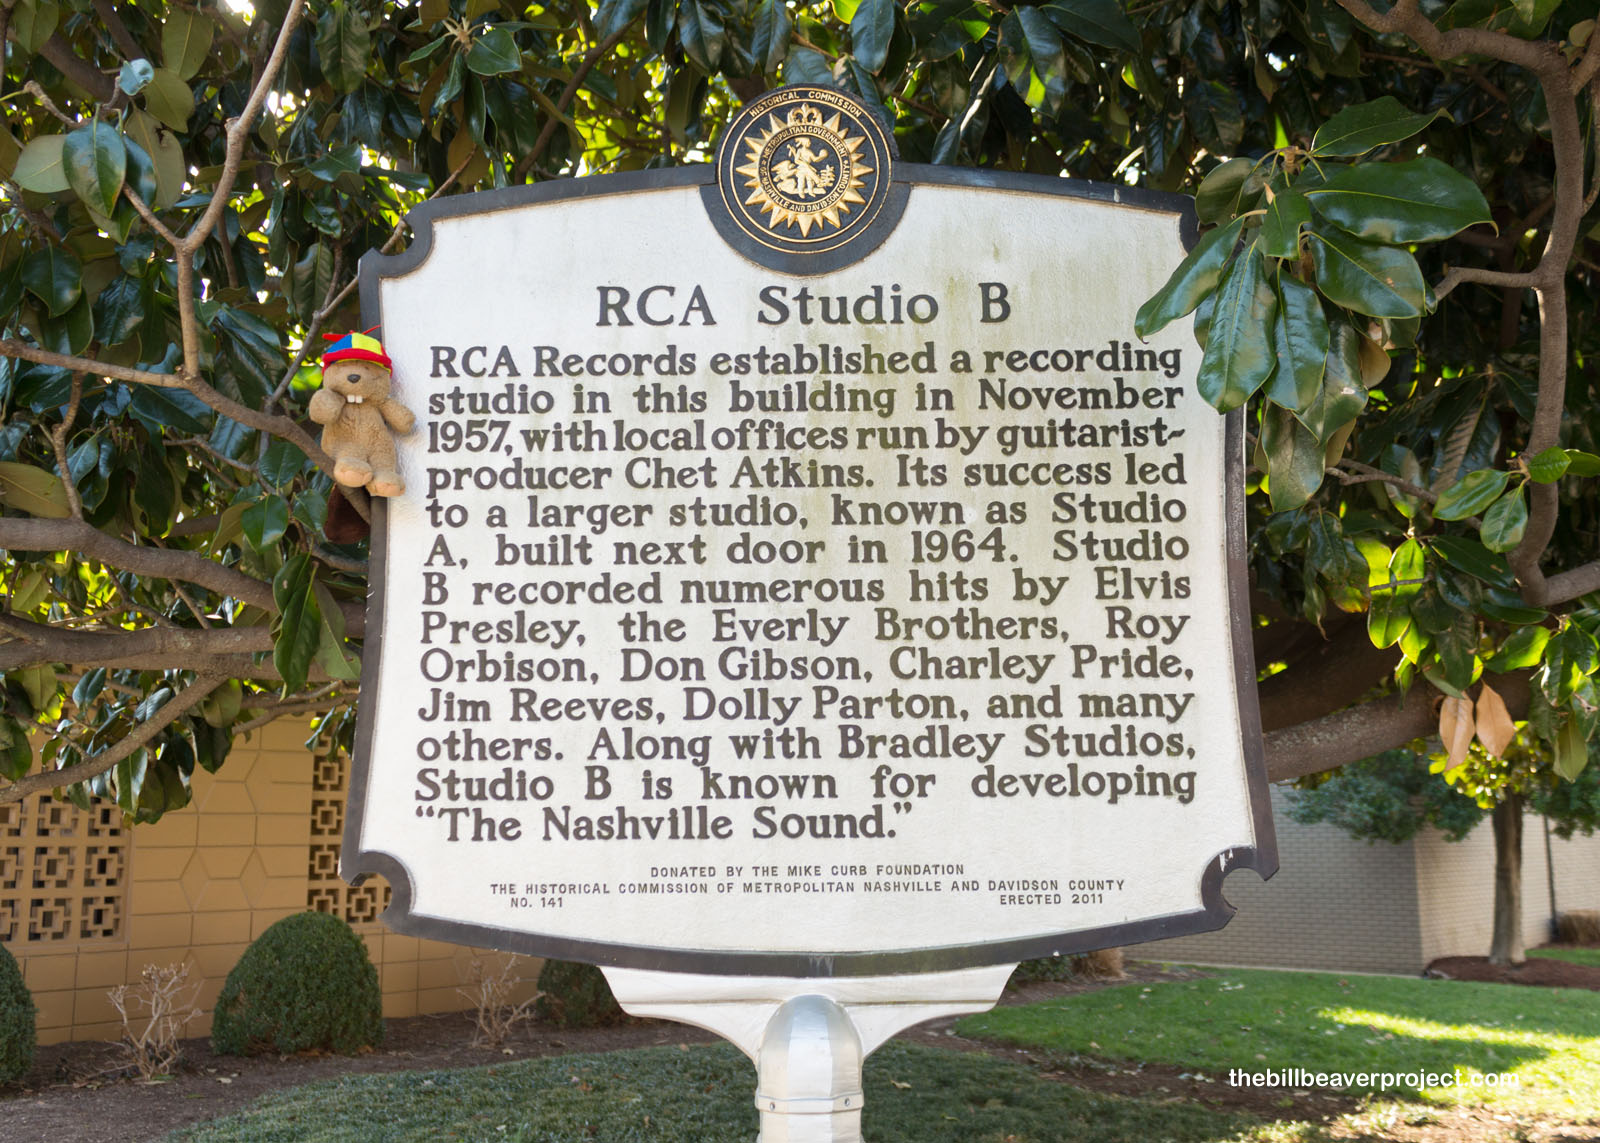 The historical plaque!